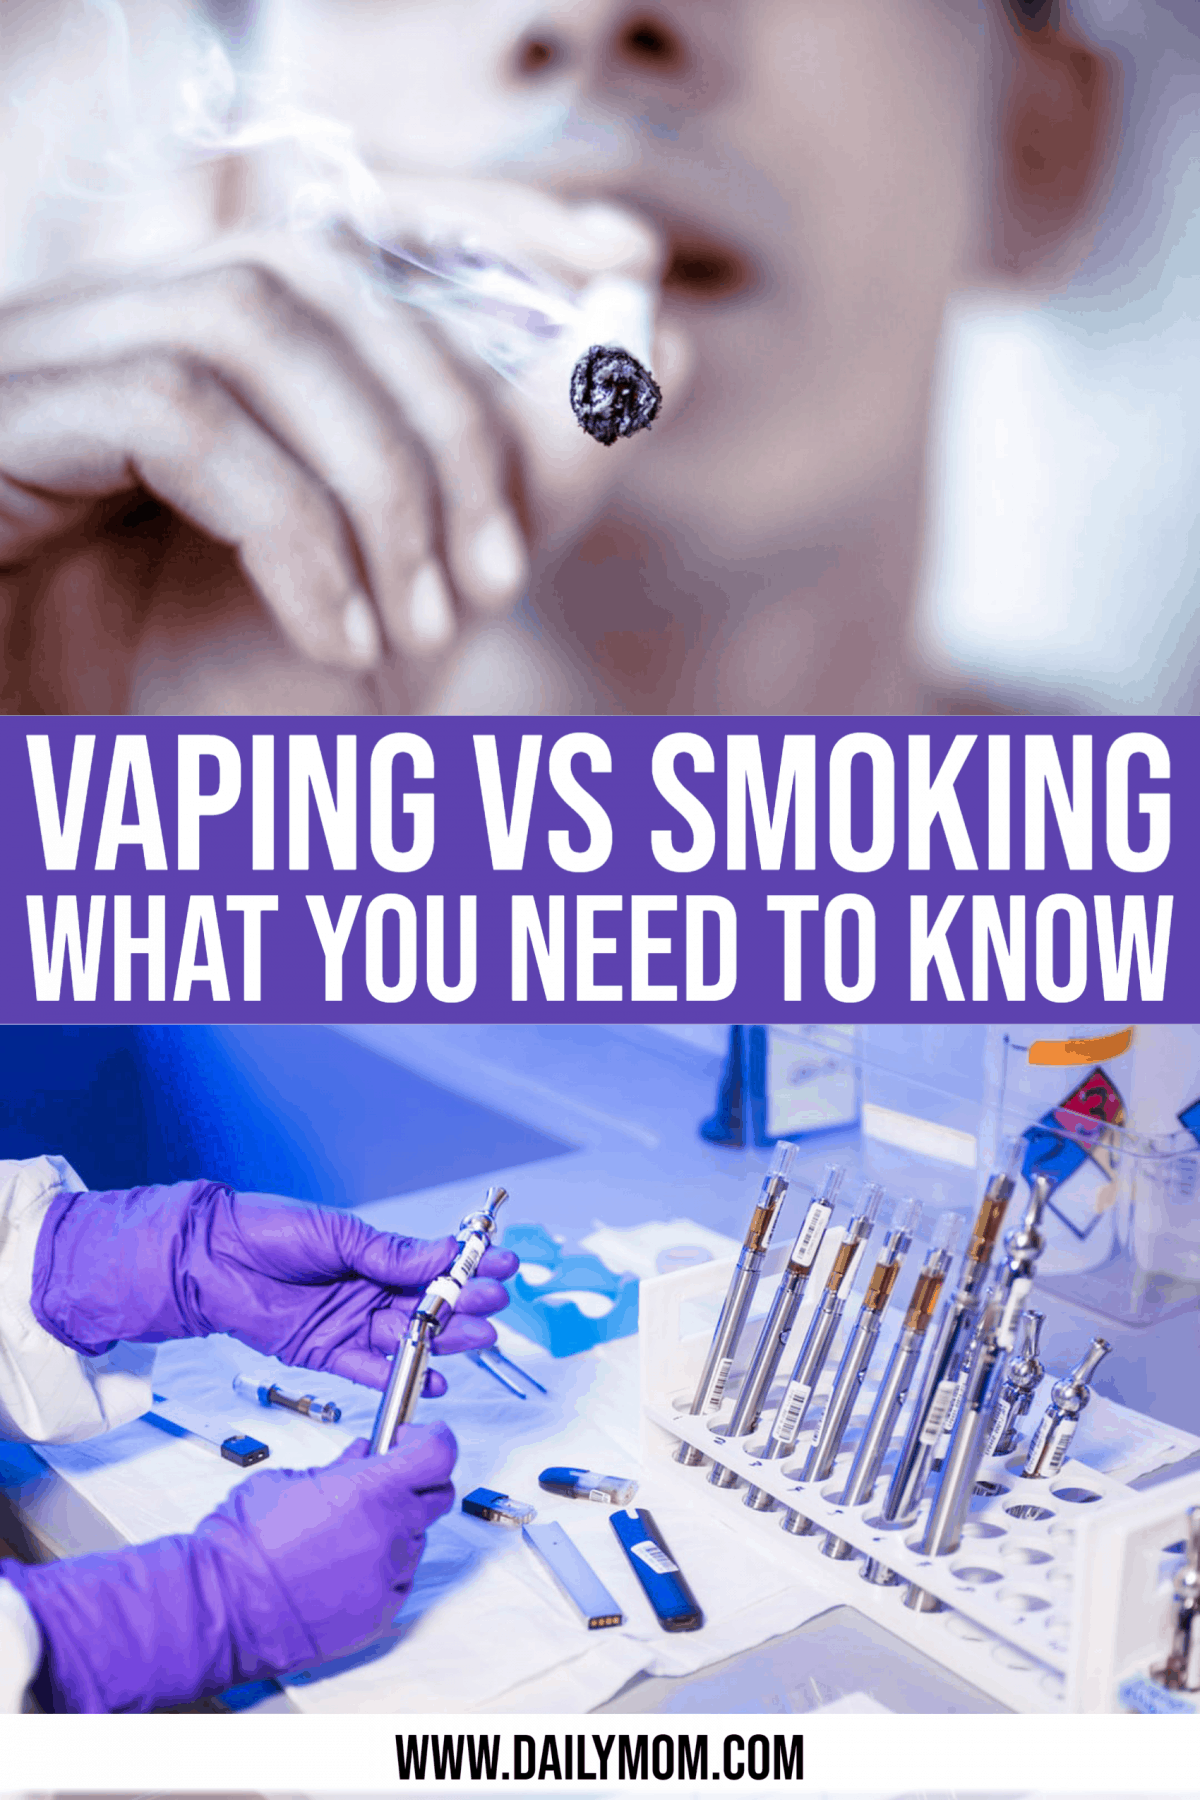 Vaping Vs Smoking: What You Need To Know